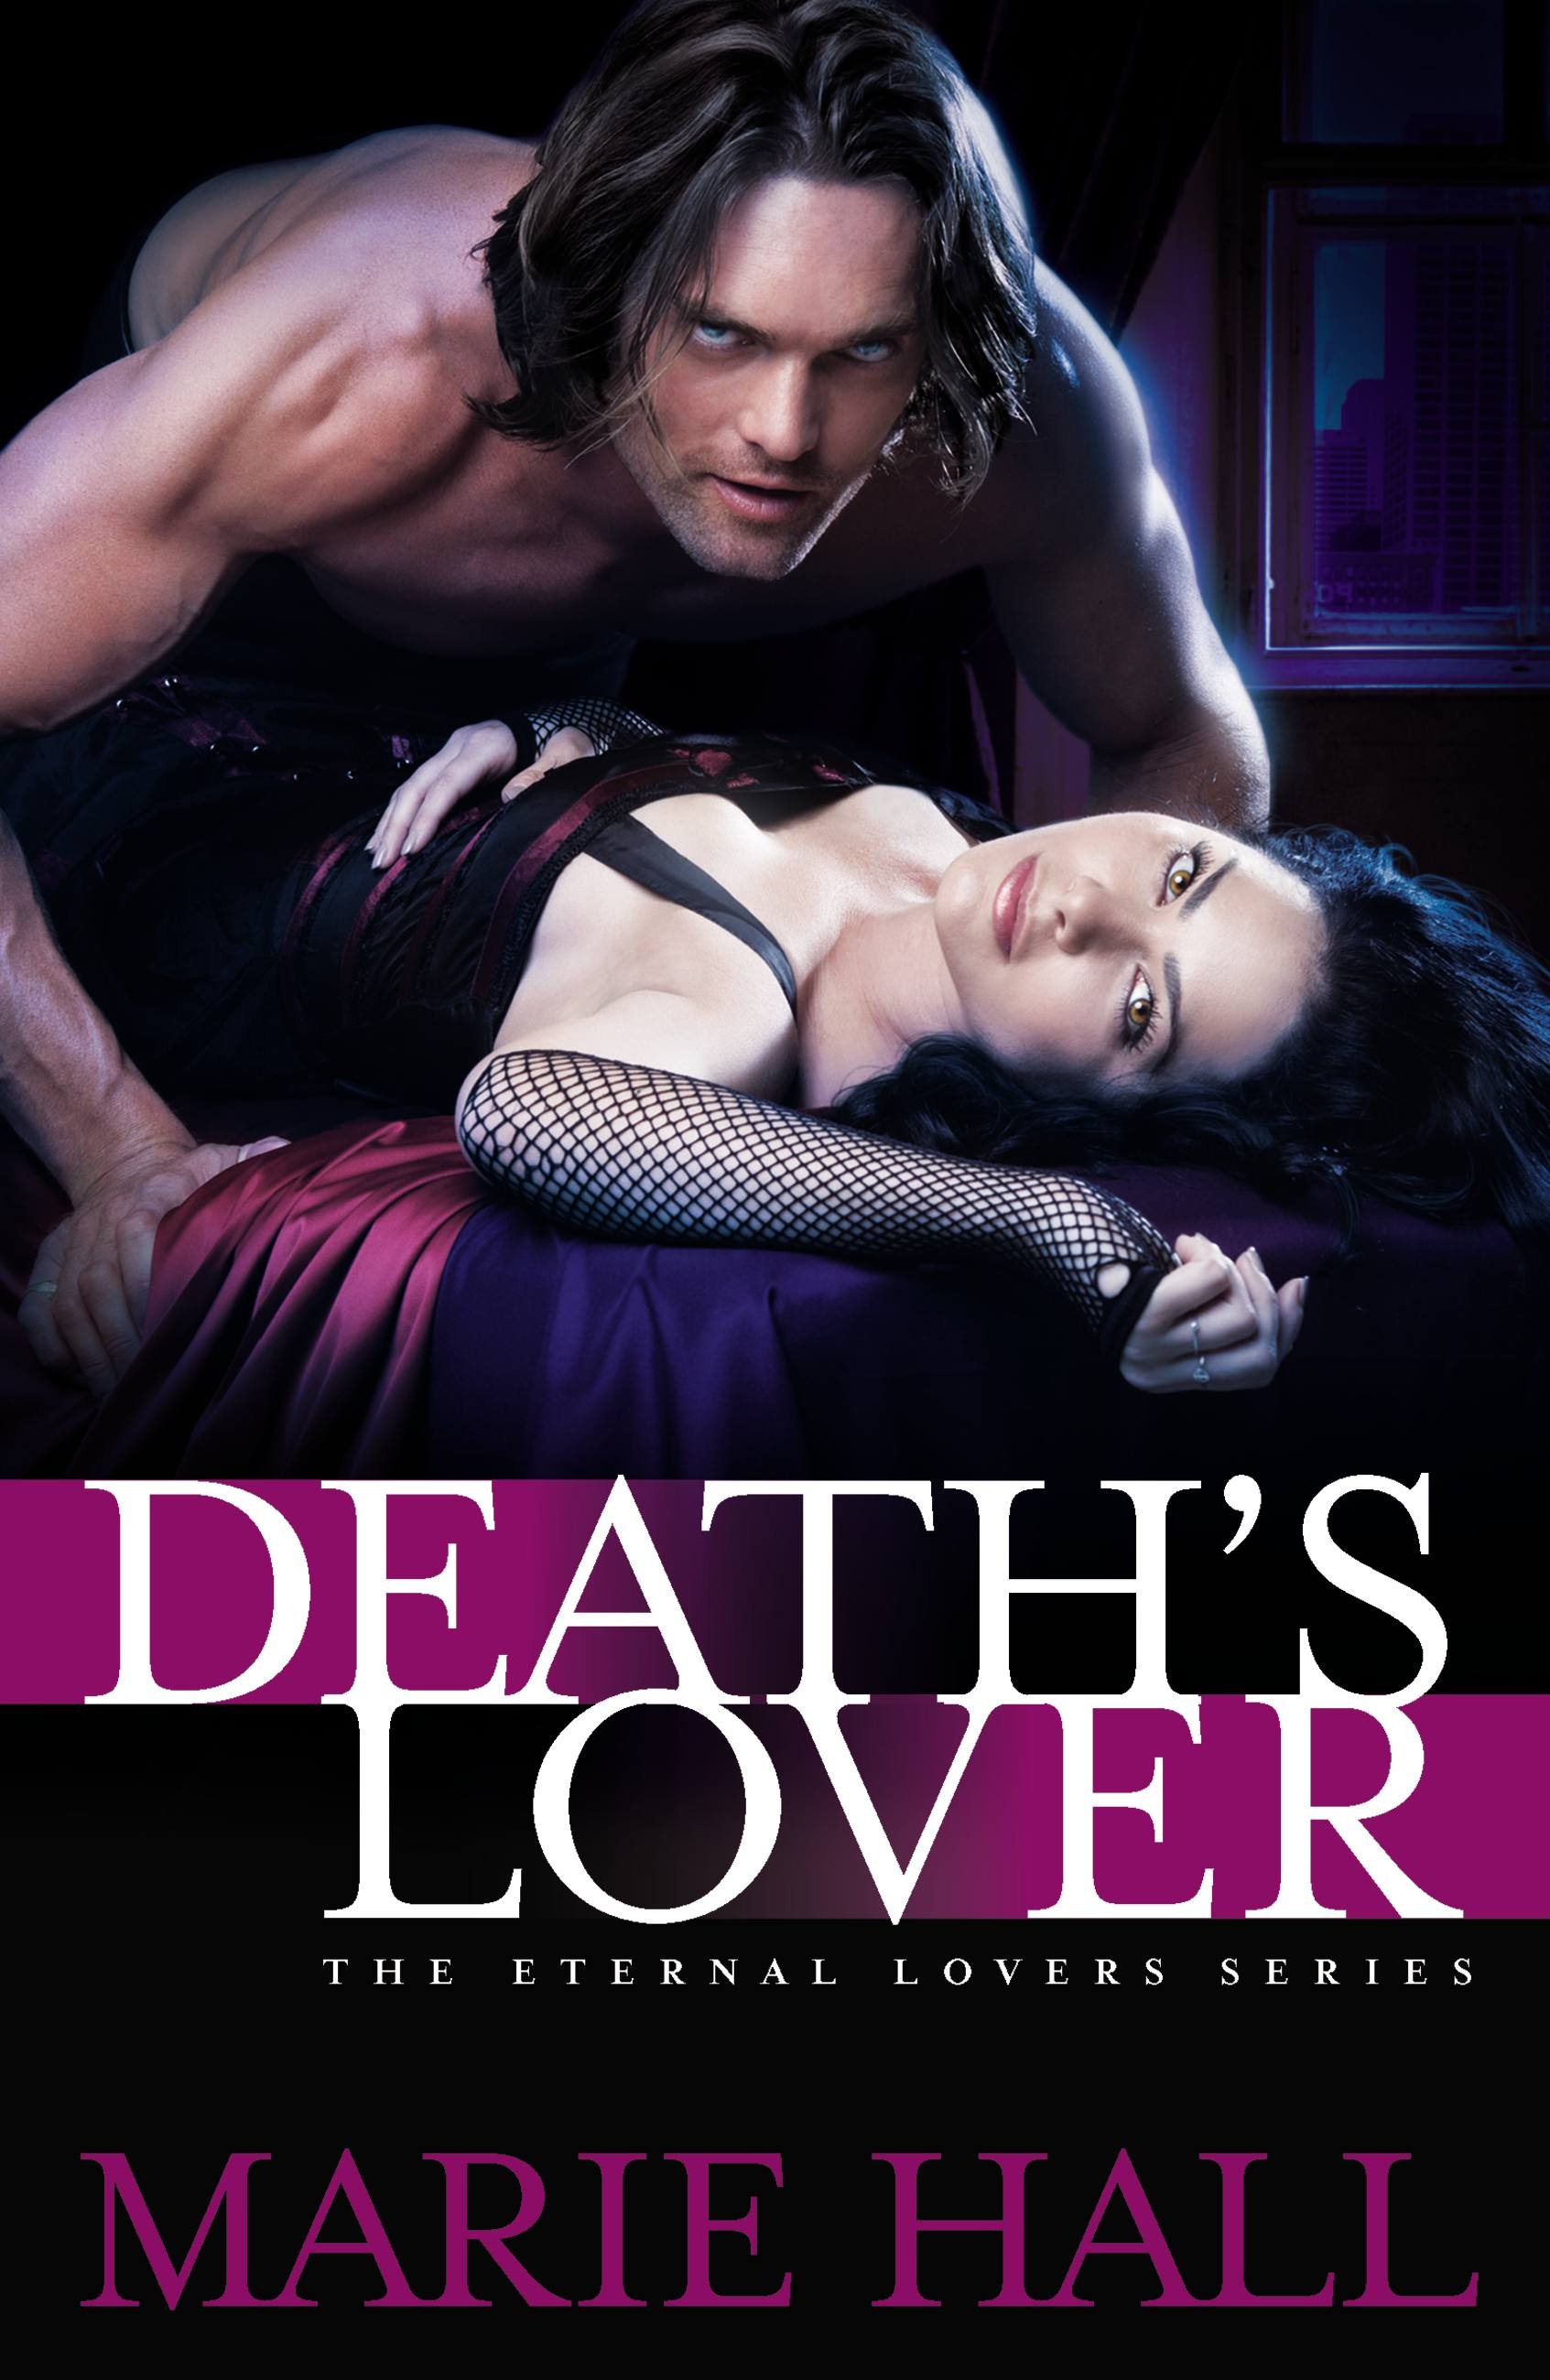 Death's　Lover　Book　by　Marie　Hachette　Hall　Group